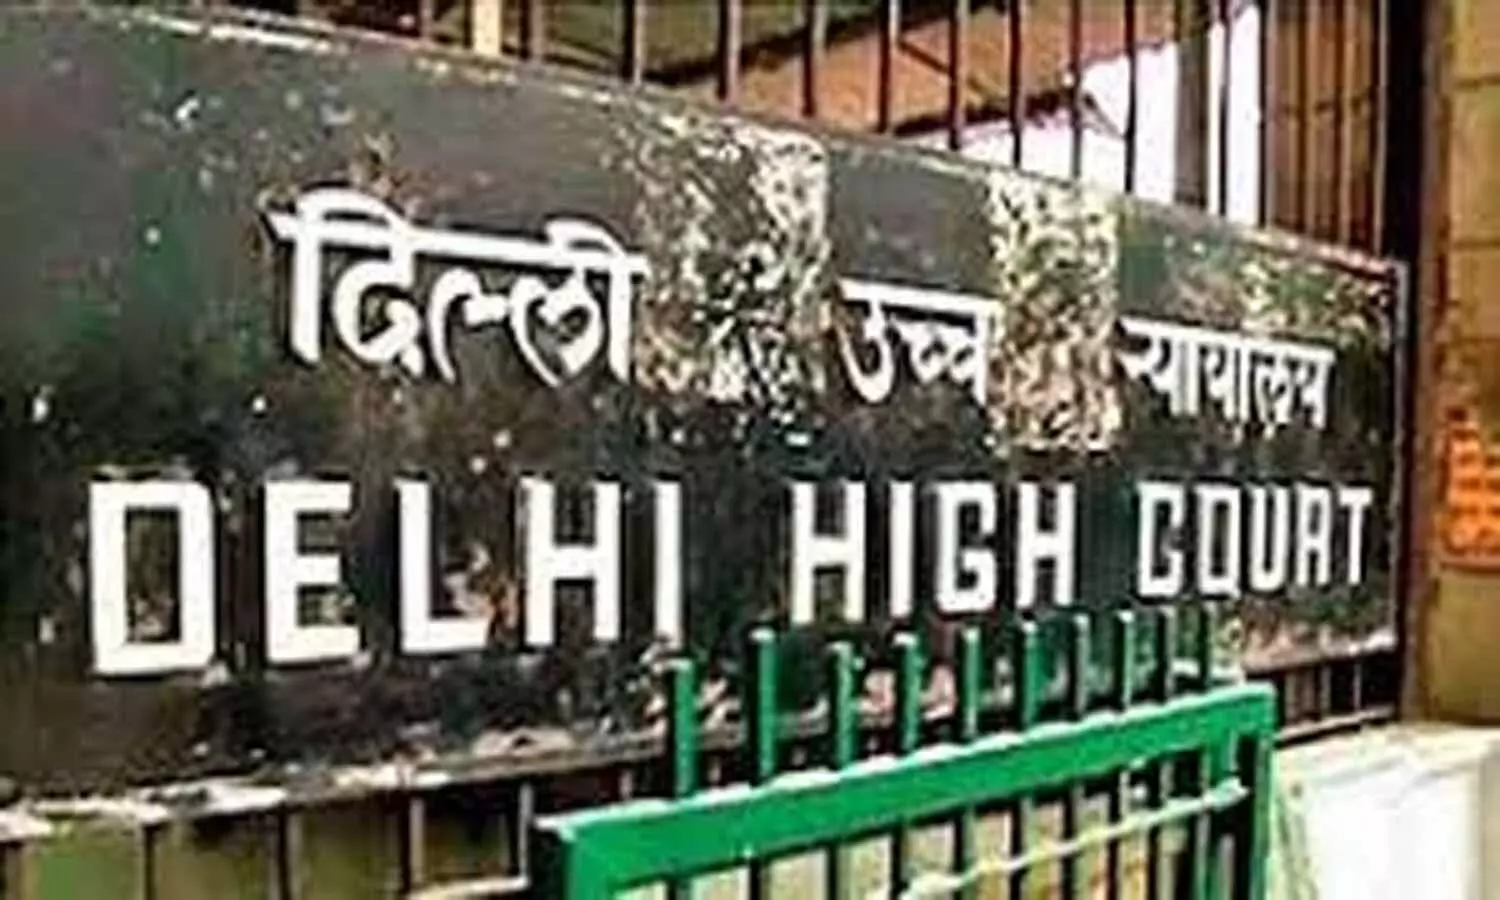 PIL challenging Upper Age Limit of 25 years For Veterinary Courses: Delhi HC seeks Govt reply